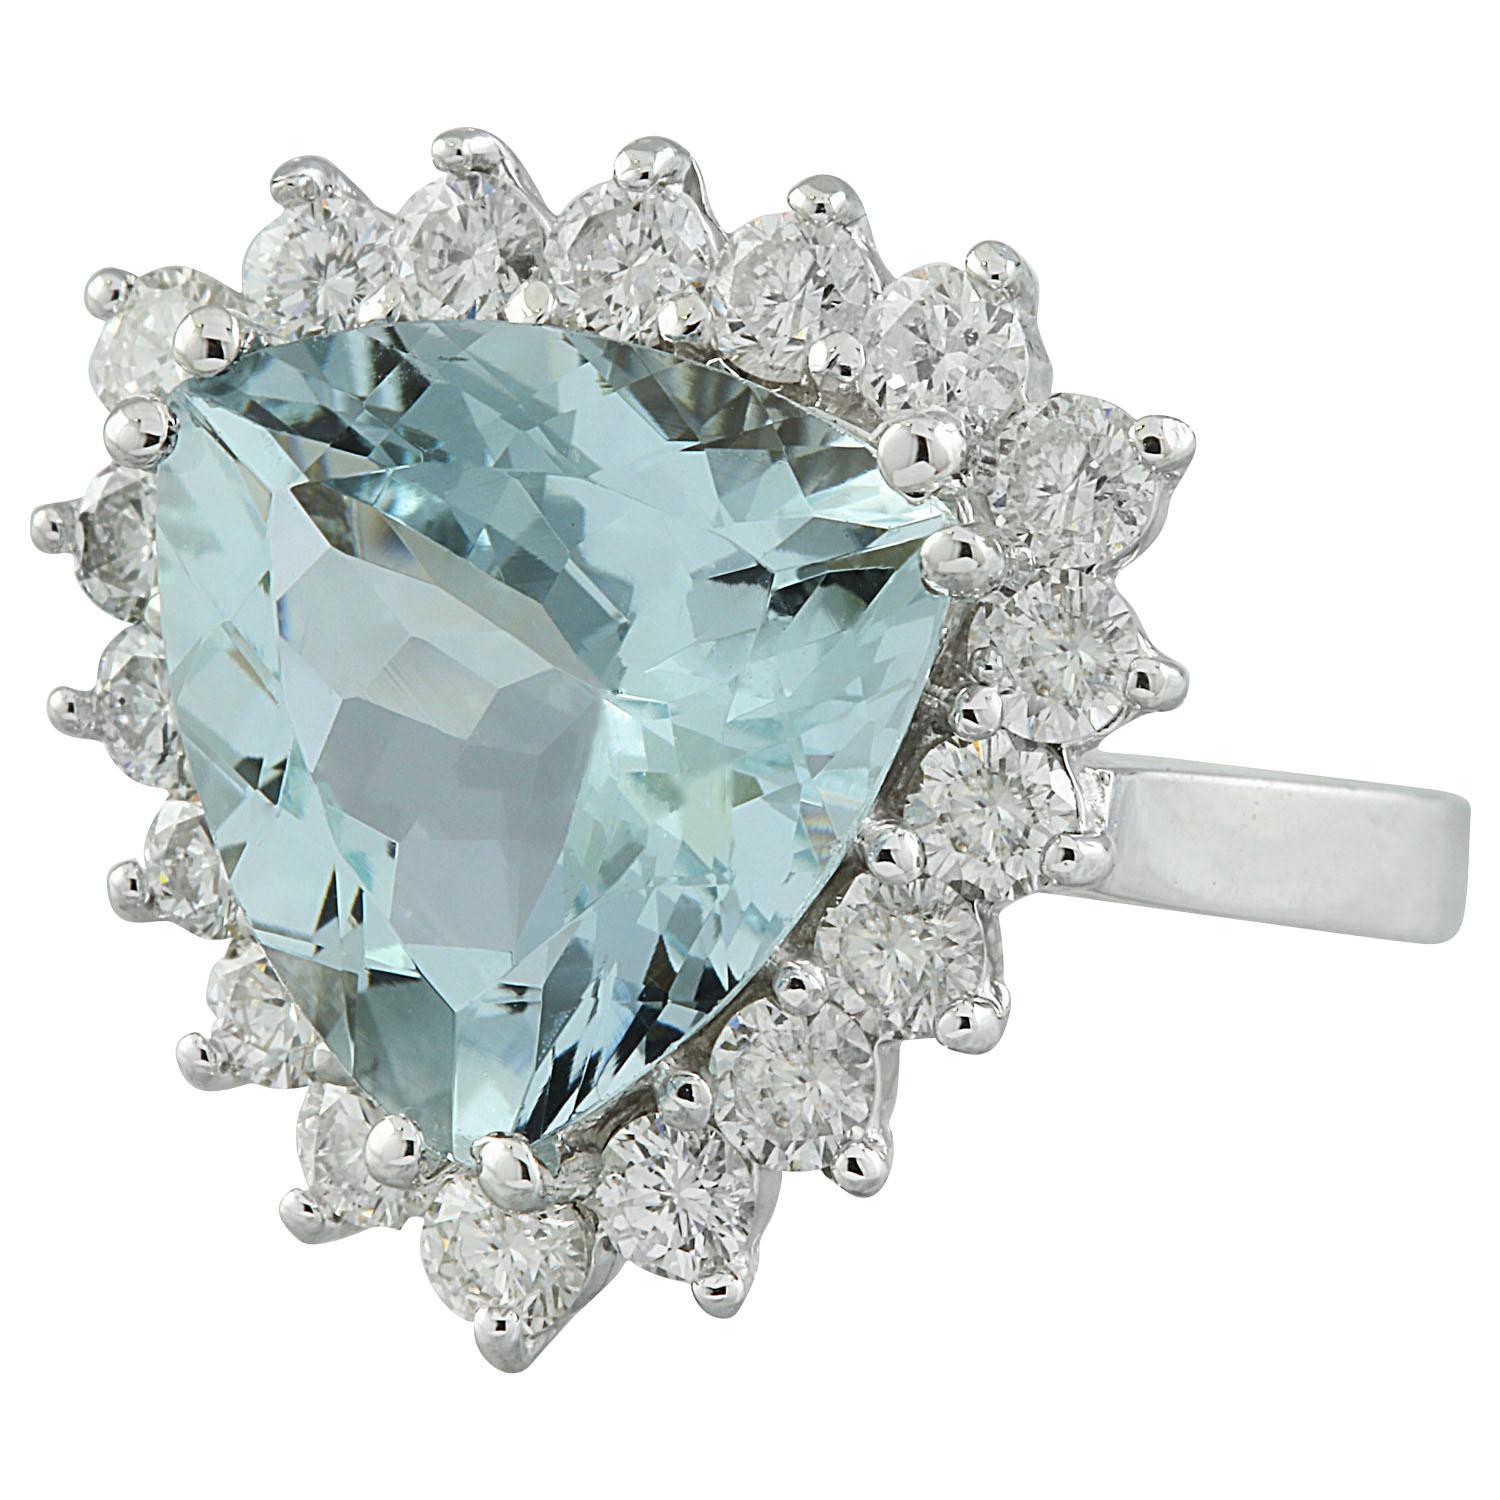 7.12 Carat Natural Aquamarine 14 Karat Solid White Gold Diamond Ring
Stamped: 14K 
Total Ring Weight: 5.5 Grams 
Aquamarine Weight 6.07 Carat (12.00x12.00 Millimeters)
Diamond Weight: 1.05 carat (F-G Color, VS2-SI1 Clarity)
Quantity: 18 
Face